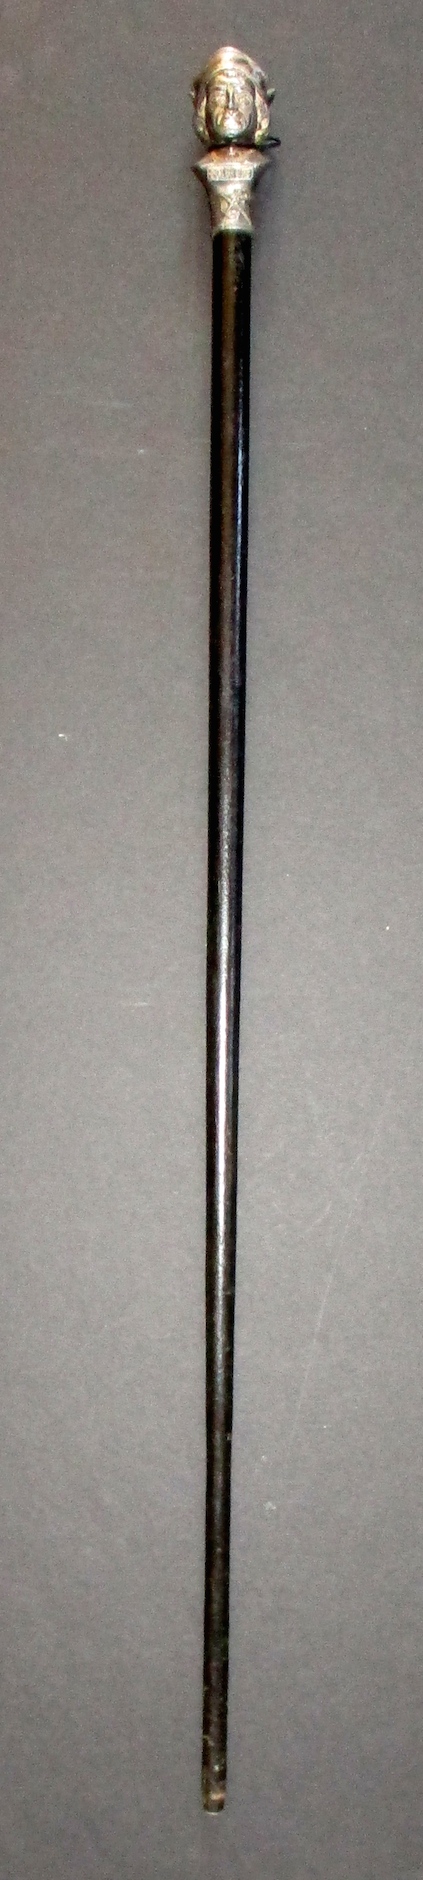 Waling Stick w/Bust of Columbus - Souvenir from 1893 Columbian Exposition in Chicago